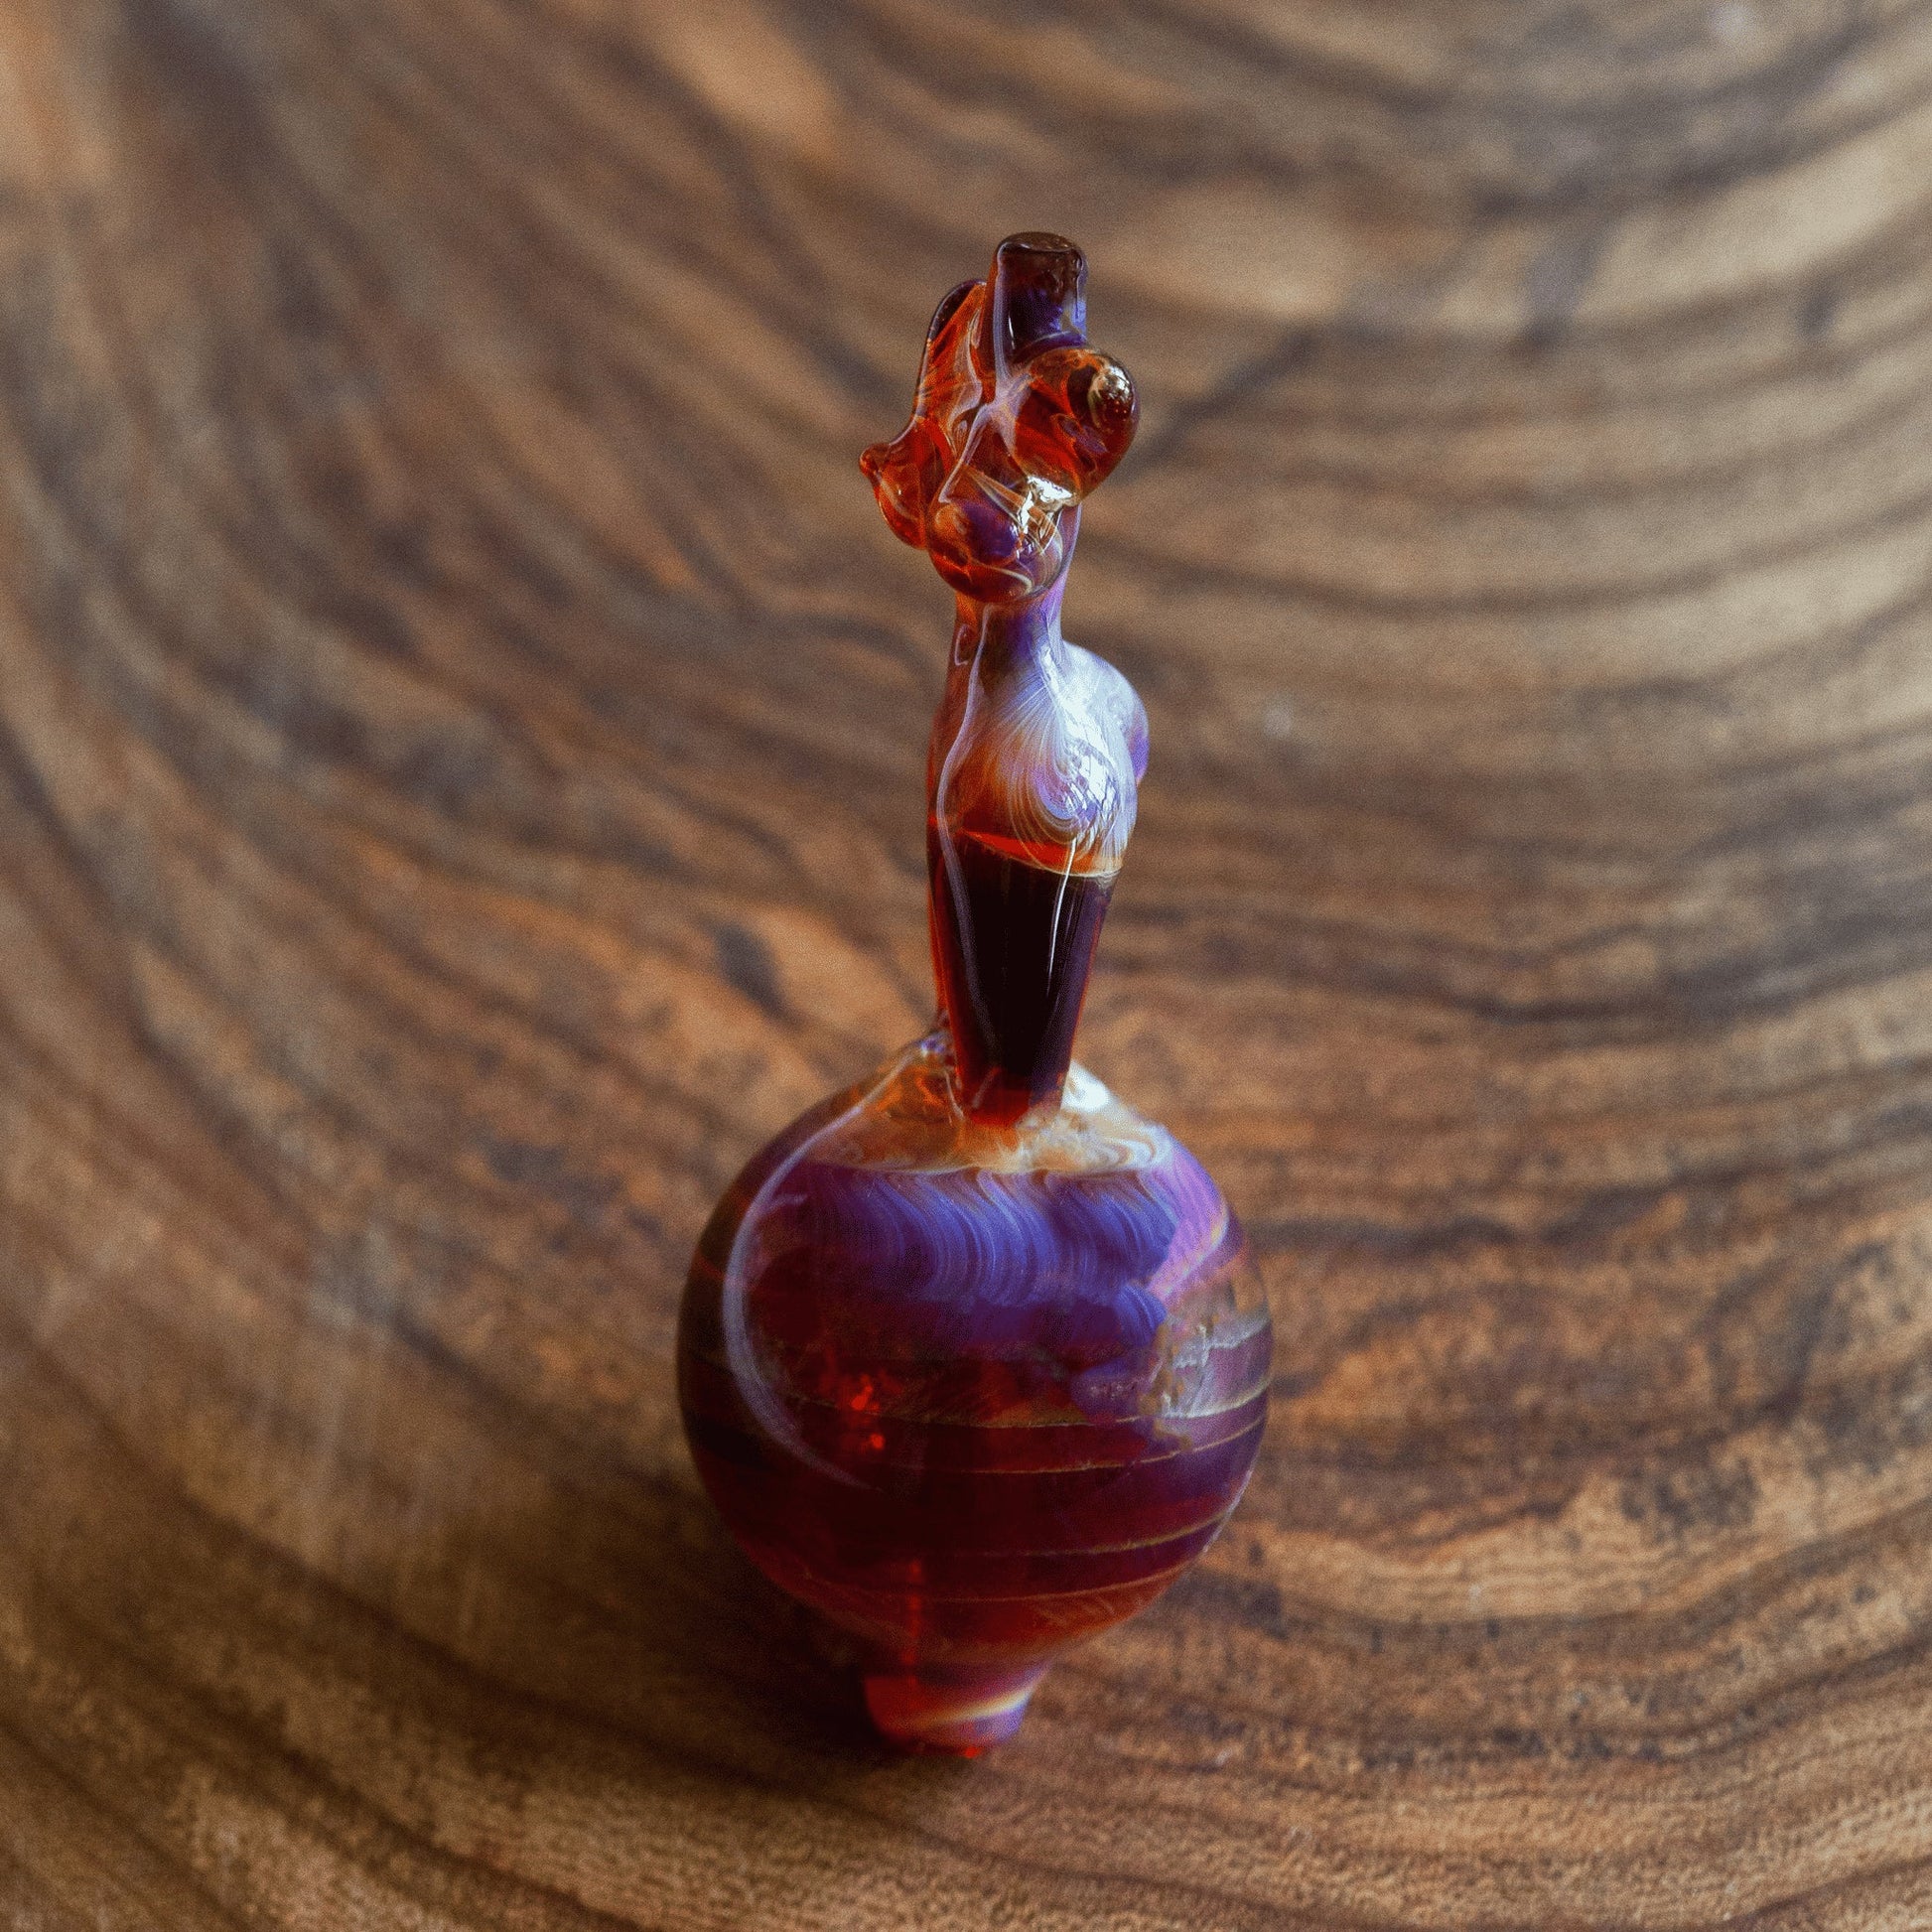 exclusive design of the Amber Purple Dabber Tool & Carb Cap Set by KT Scissorbaby